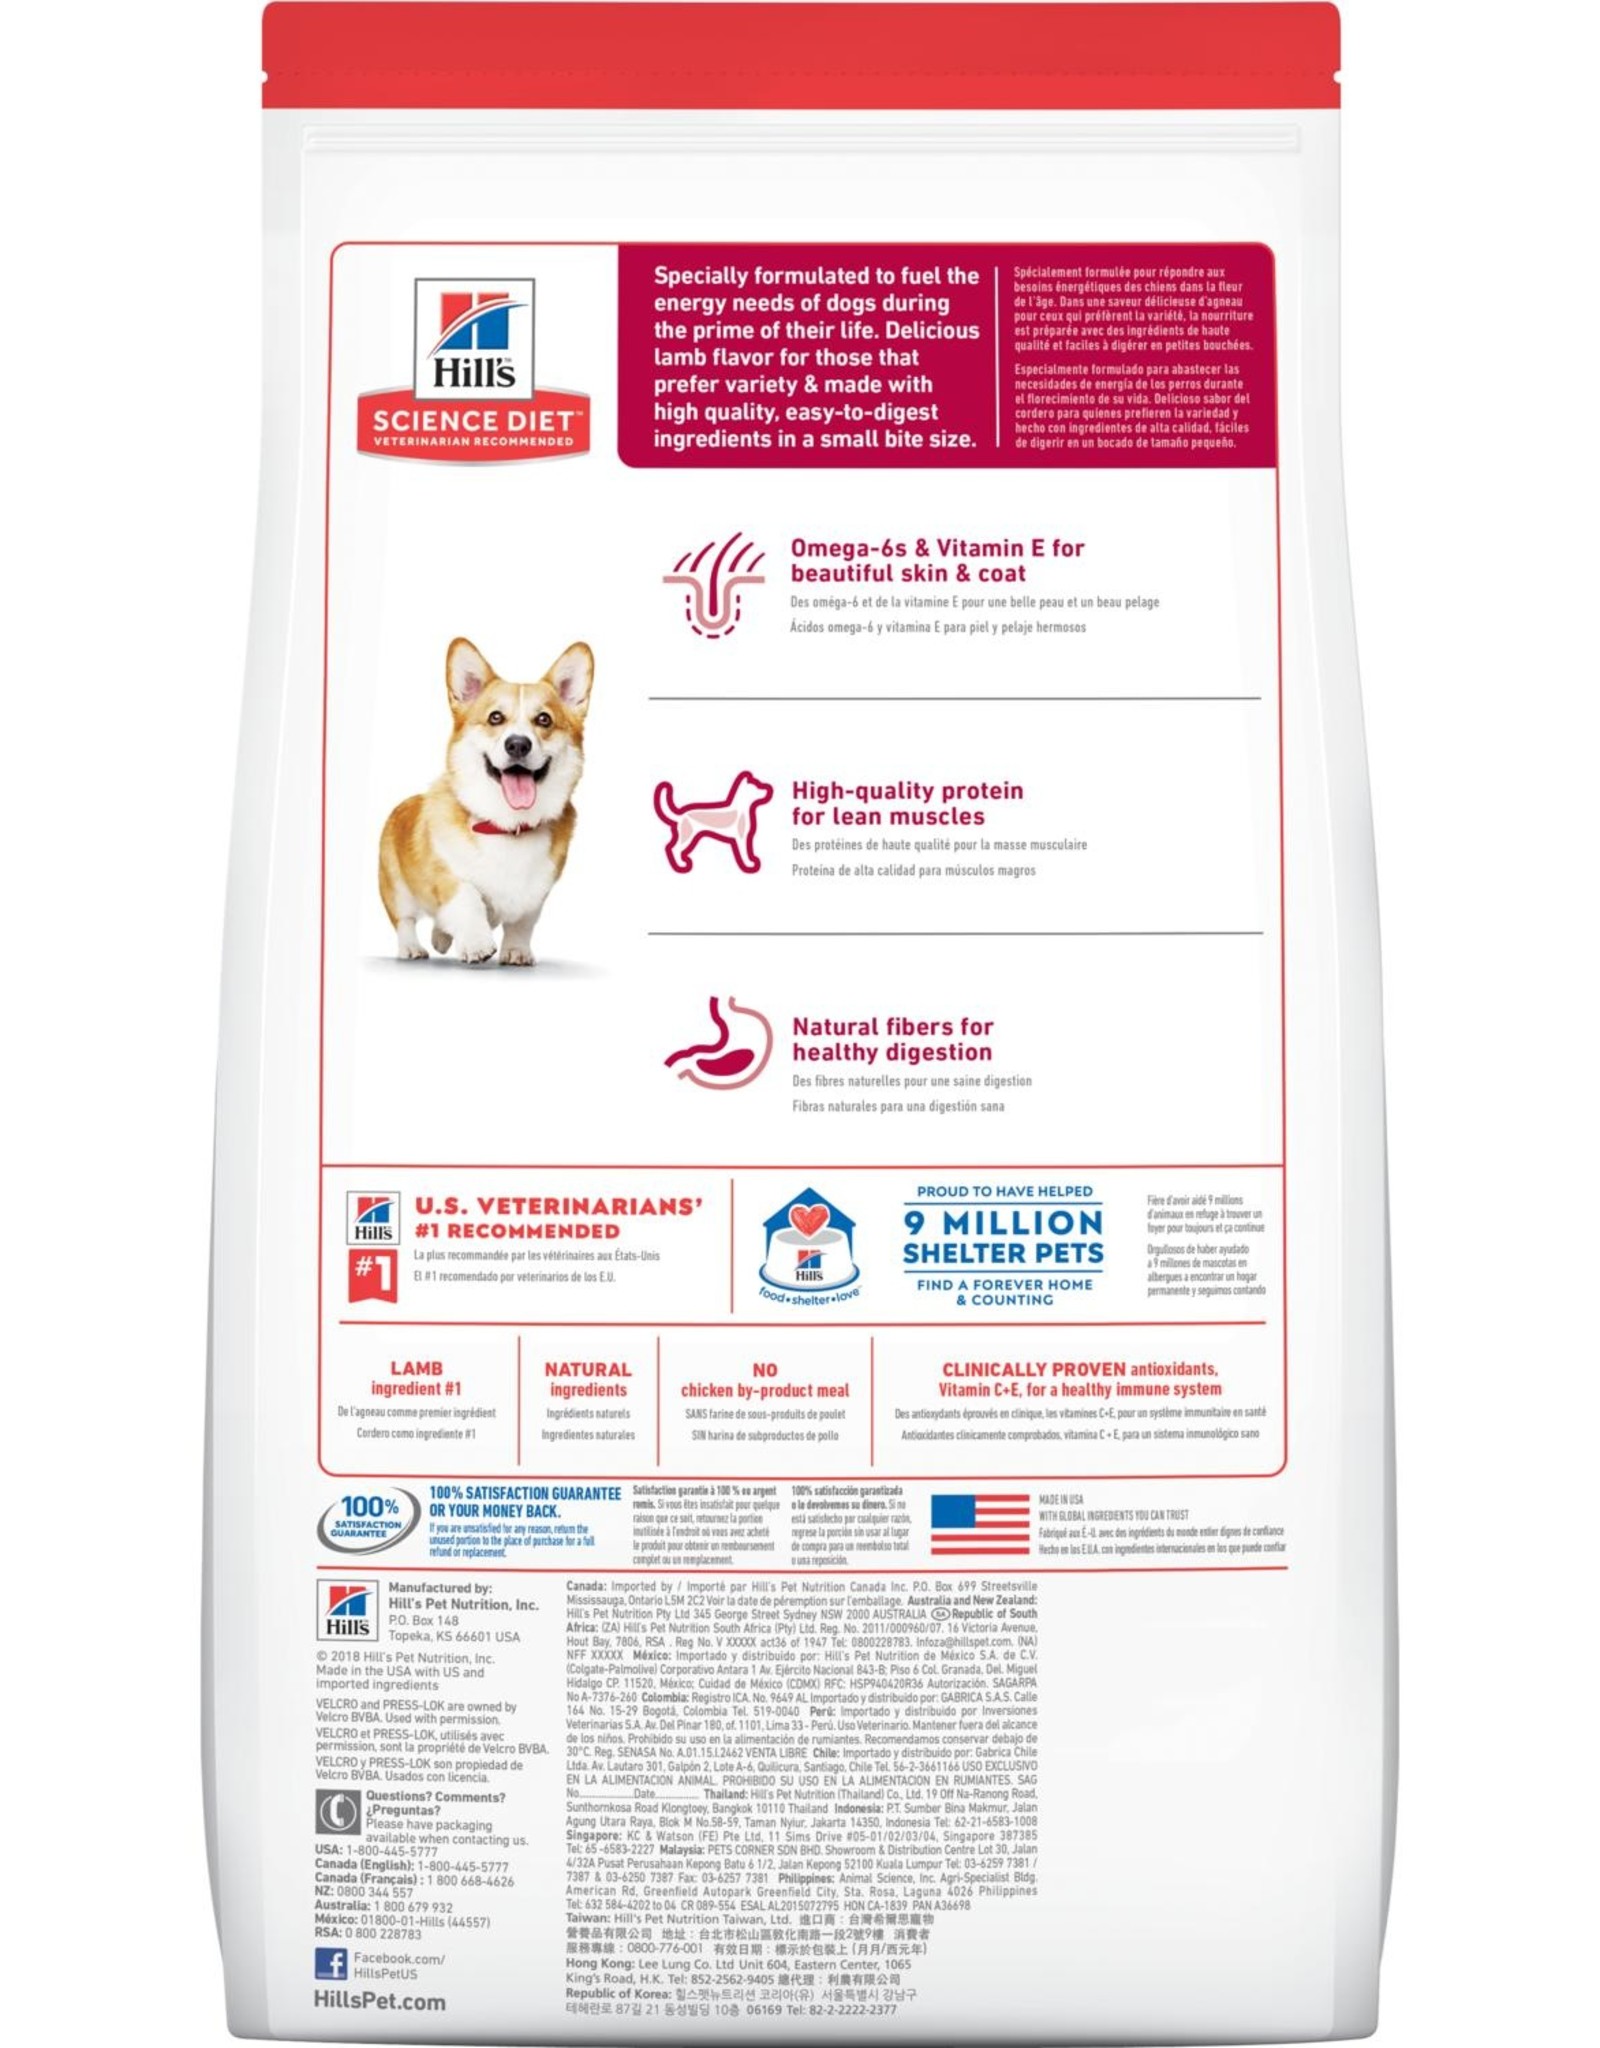 SCIENCE DIET HILL'S SCIENCE DIET CANINE ADULT LAMB & RICE SMALL BITES 15.5LBS